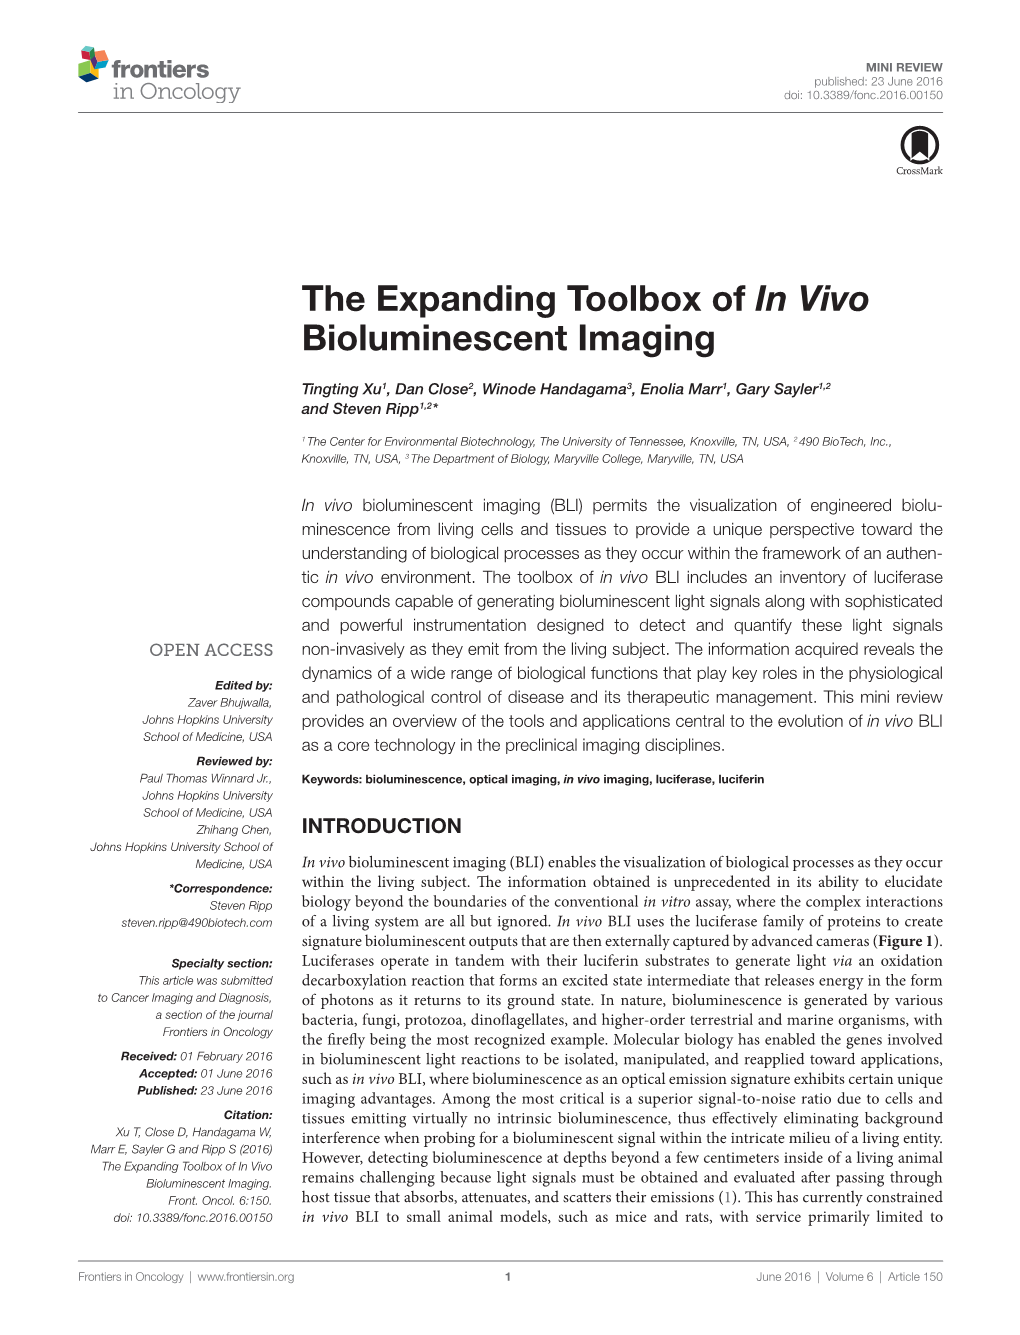 The Expanding Toolbox of ﻿In Vivo﻿ Bioluminescent Imaging